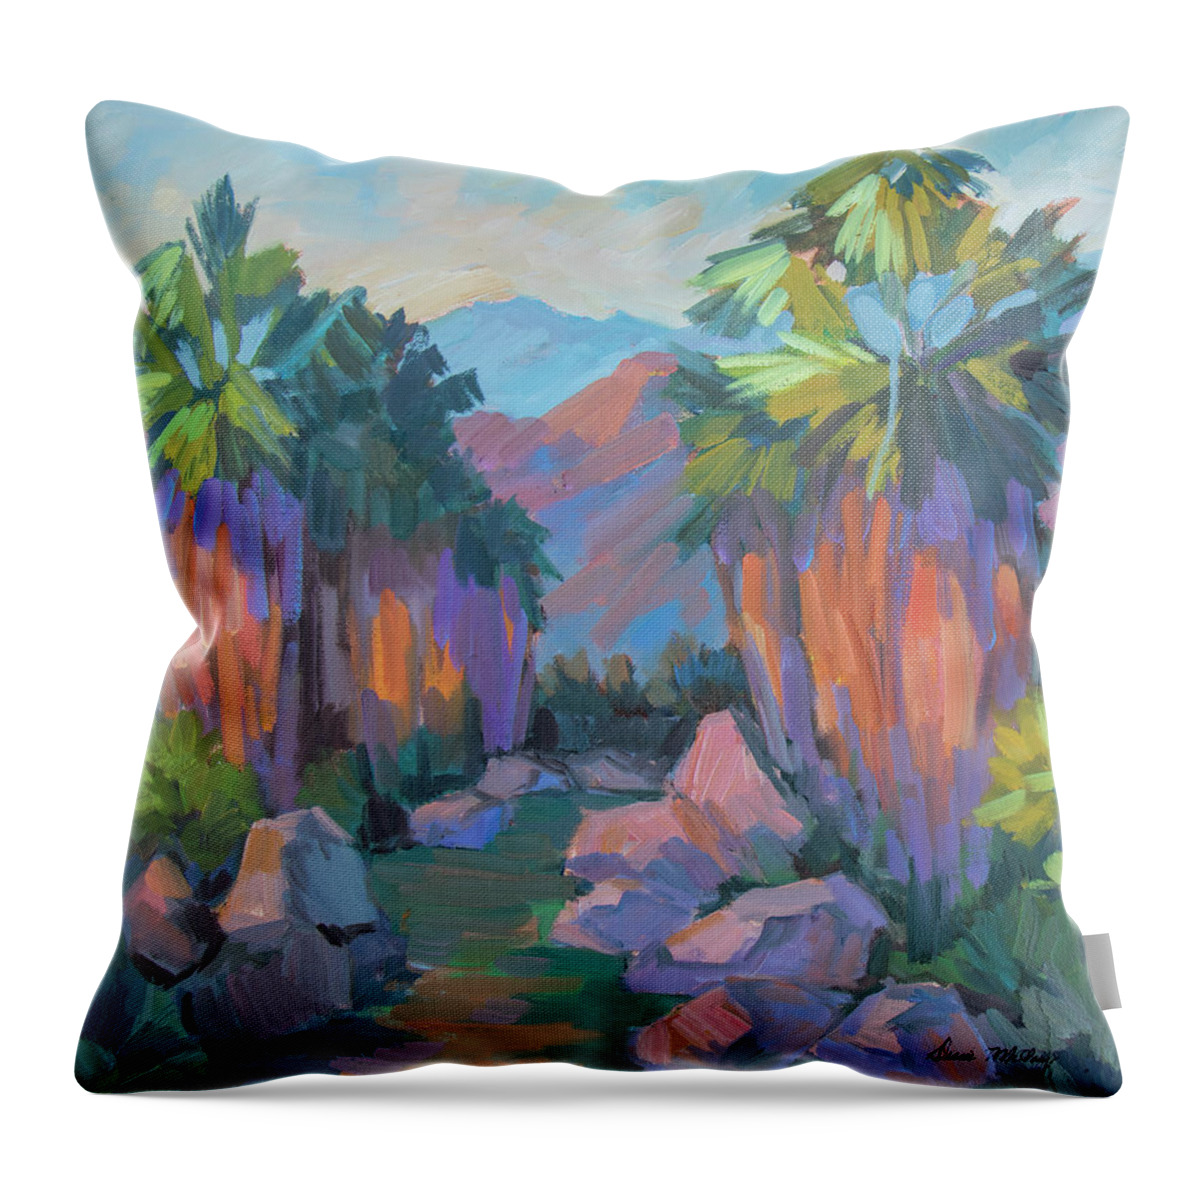 Coachella Valley Throw Pillow featuring the painting Morning Indian Canyon by Diane McClary